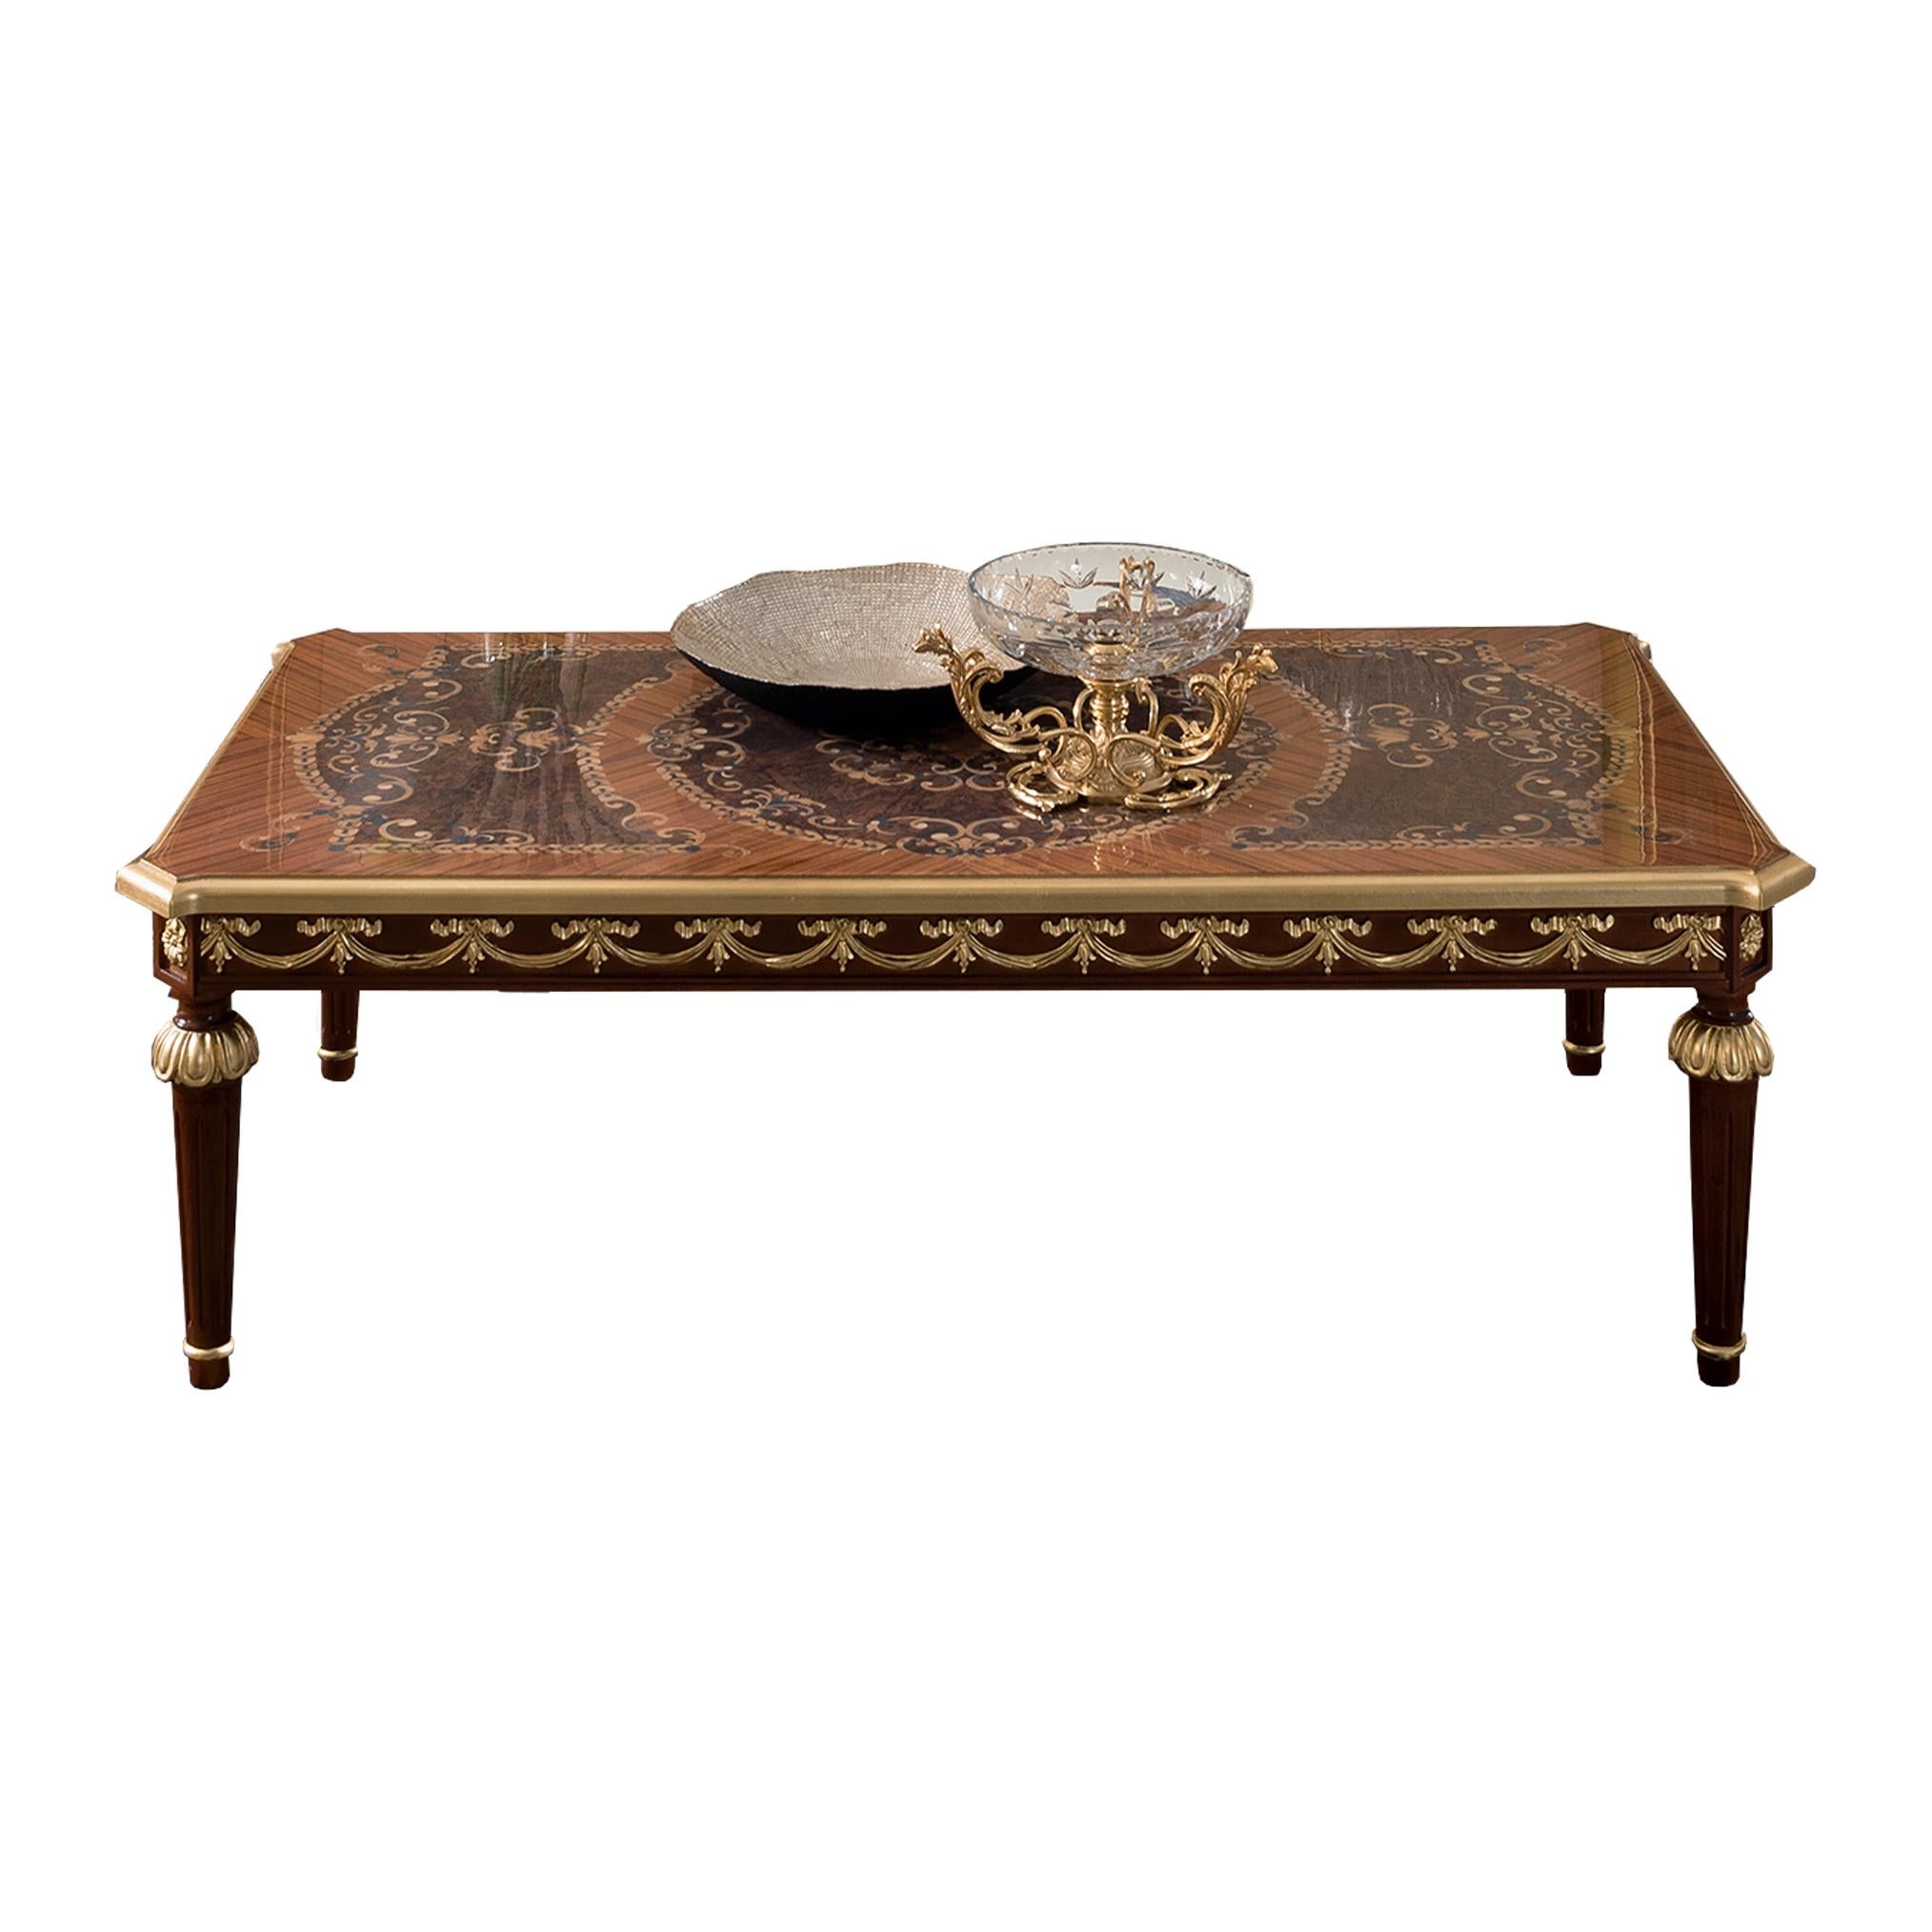 Appliqué Rectangular Coffee Table with Inlaid Top + Gold Leaf Finish, Made in Italy For Sale